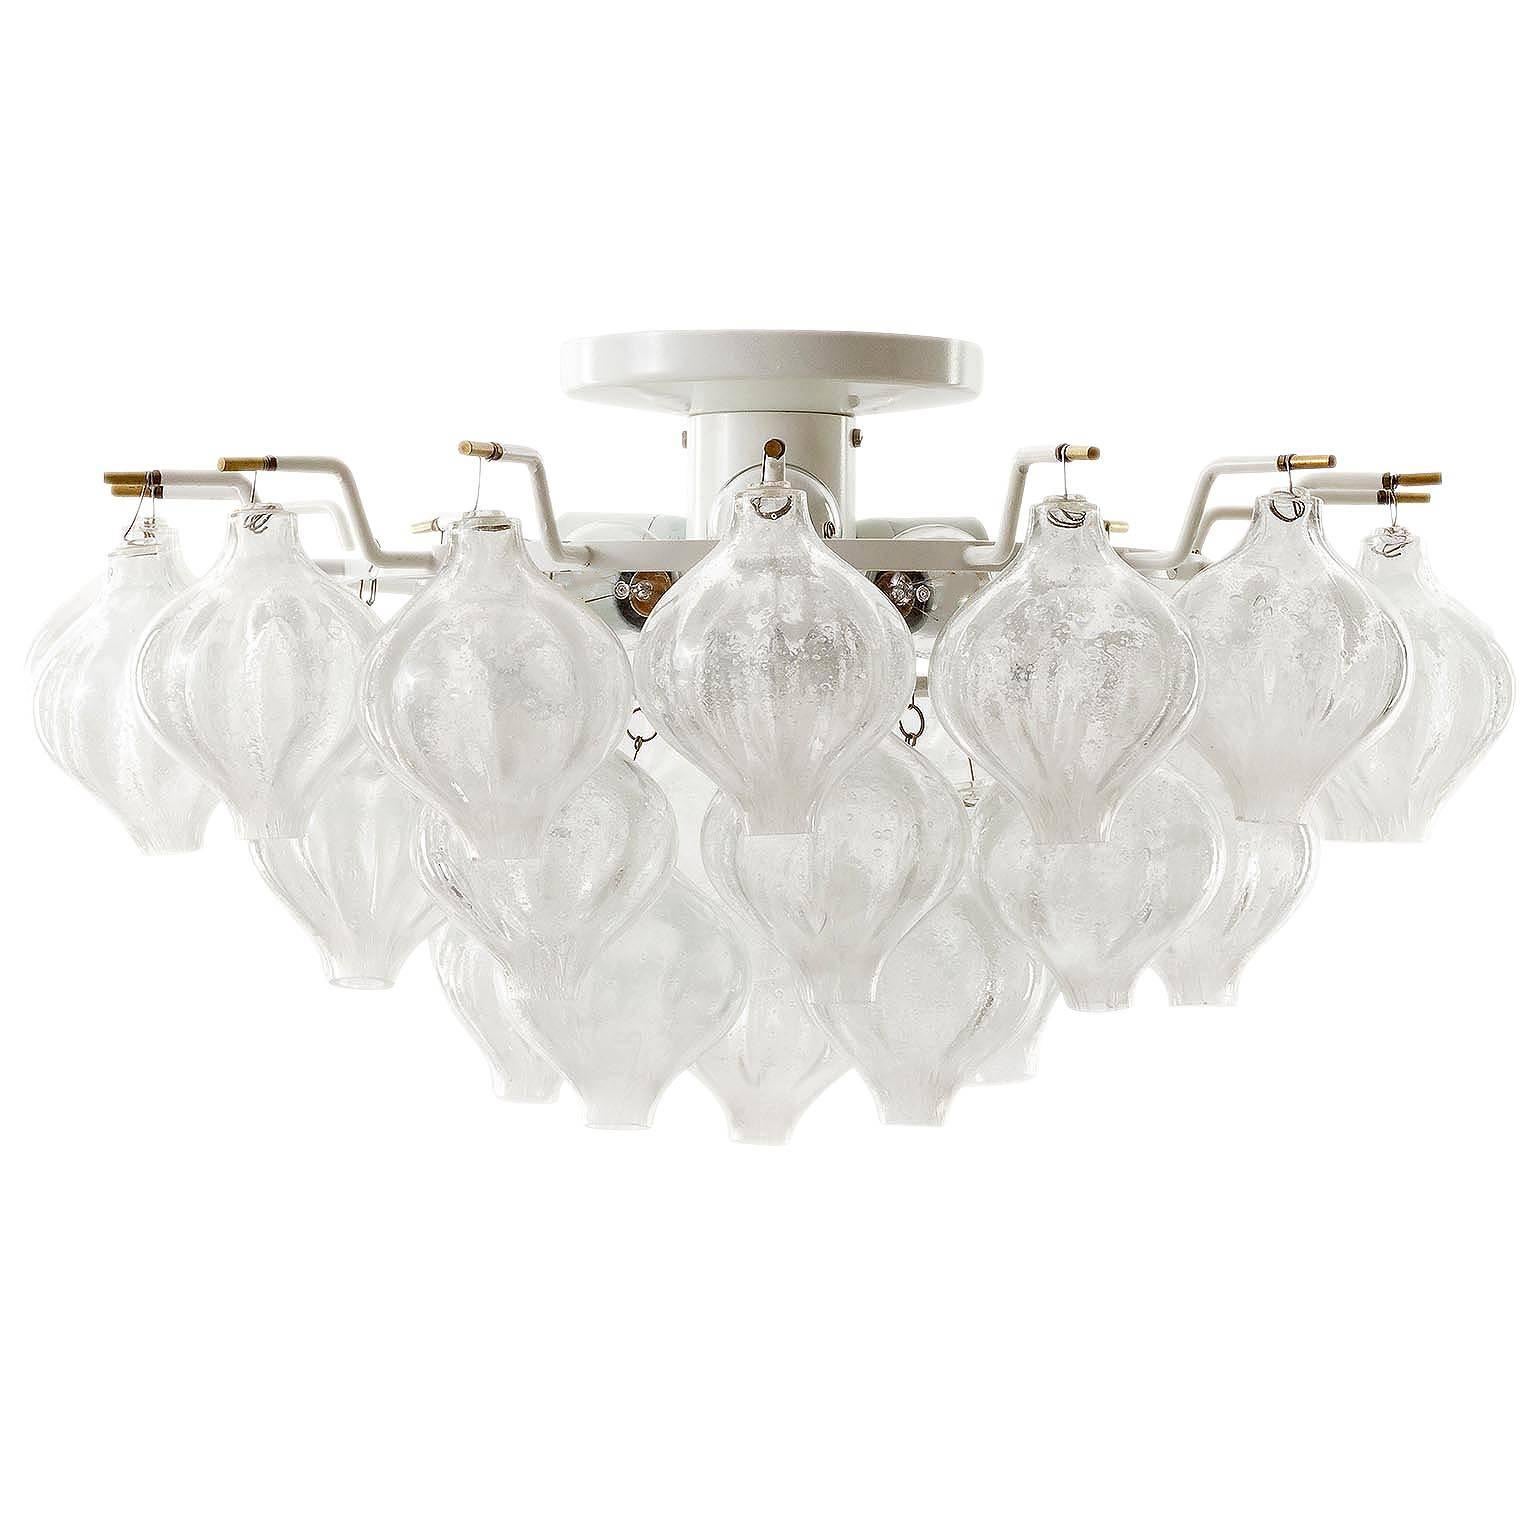 One of three large and fantastic Viennese 'Tulipan' flushmount chandeliers by J.T. Kalmar, Austria, manufactured in midcentury, circa 1970 (late 1960s or early 1970s.)
The name Tulipan derives from the tulip shaped hand blown bubble glasses. The